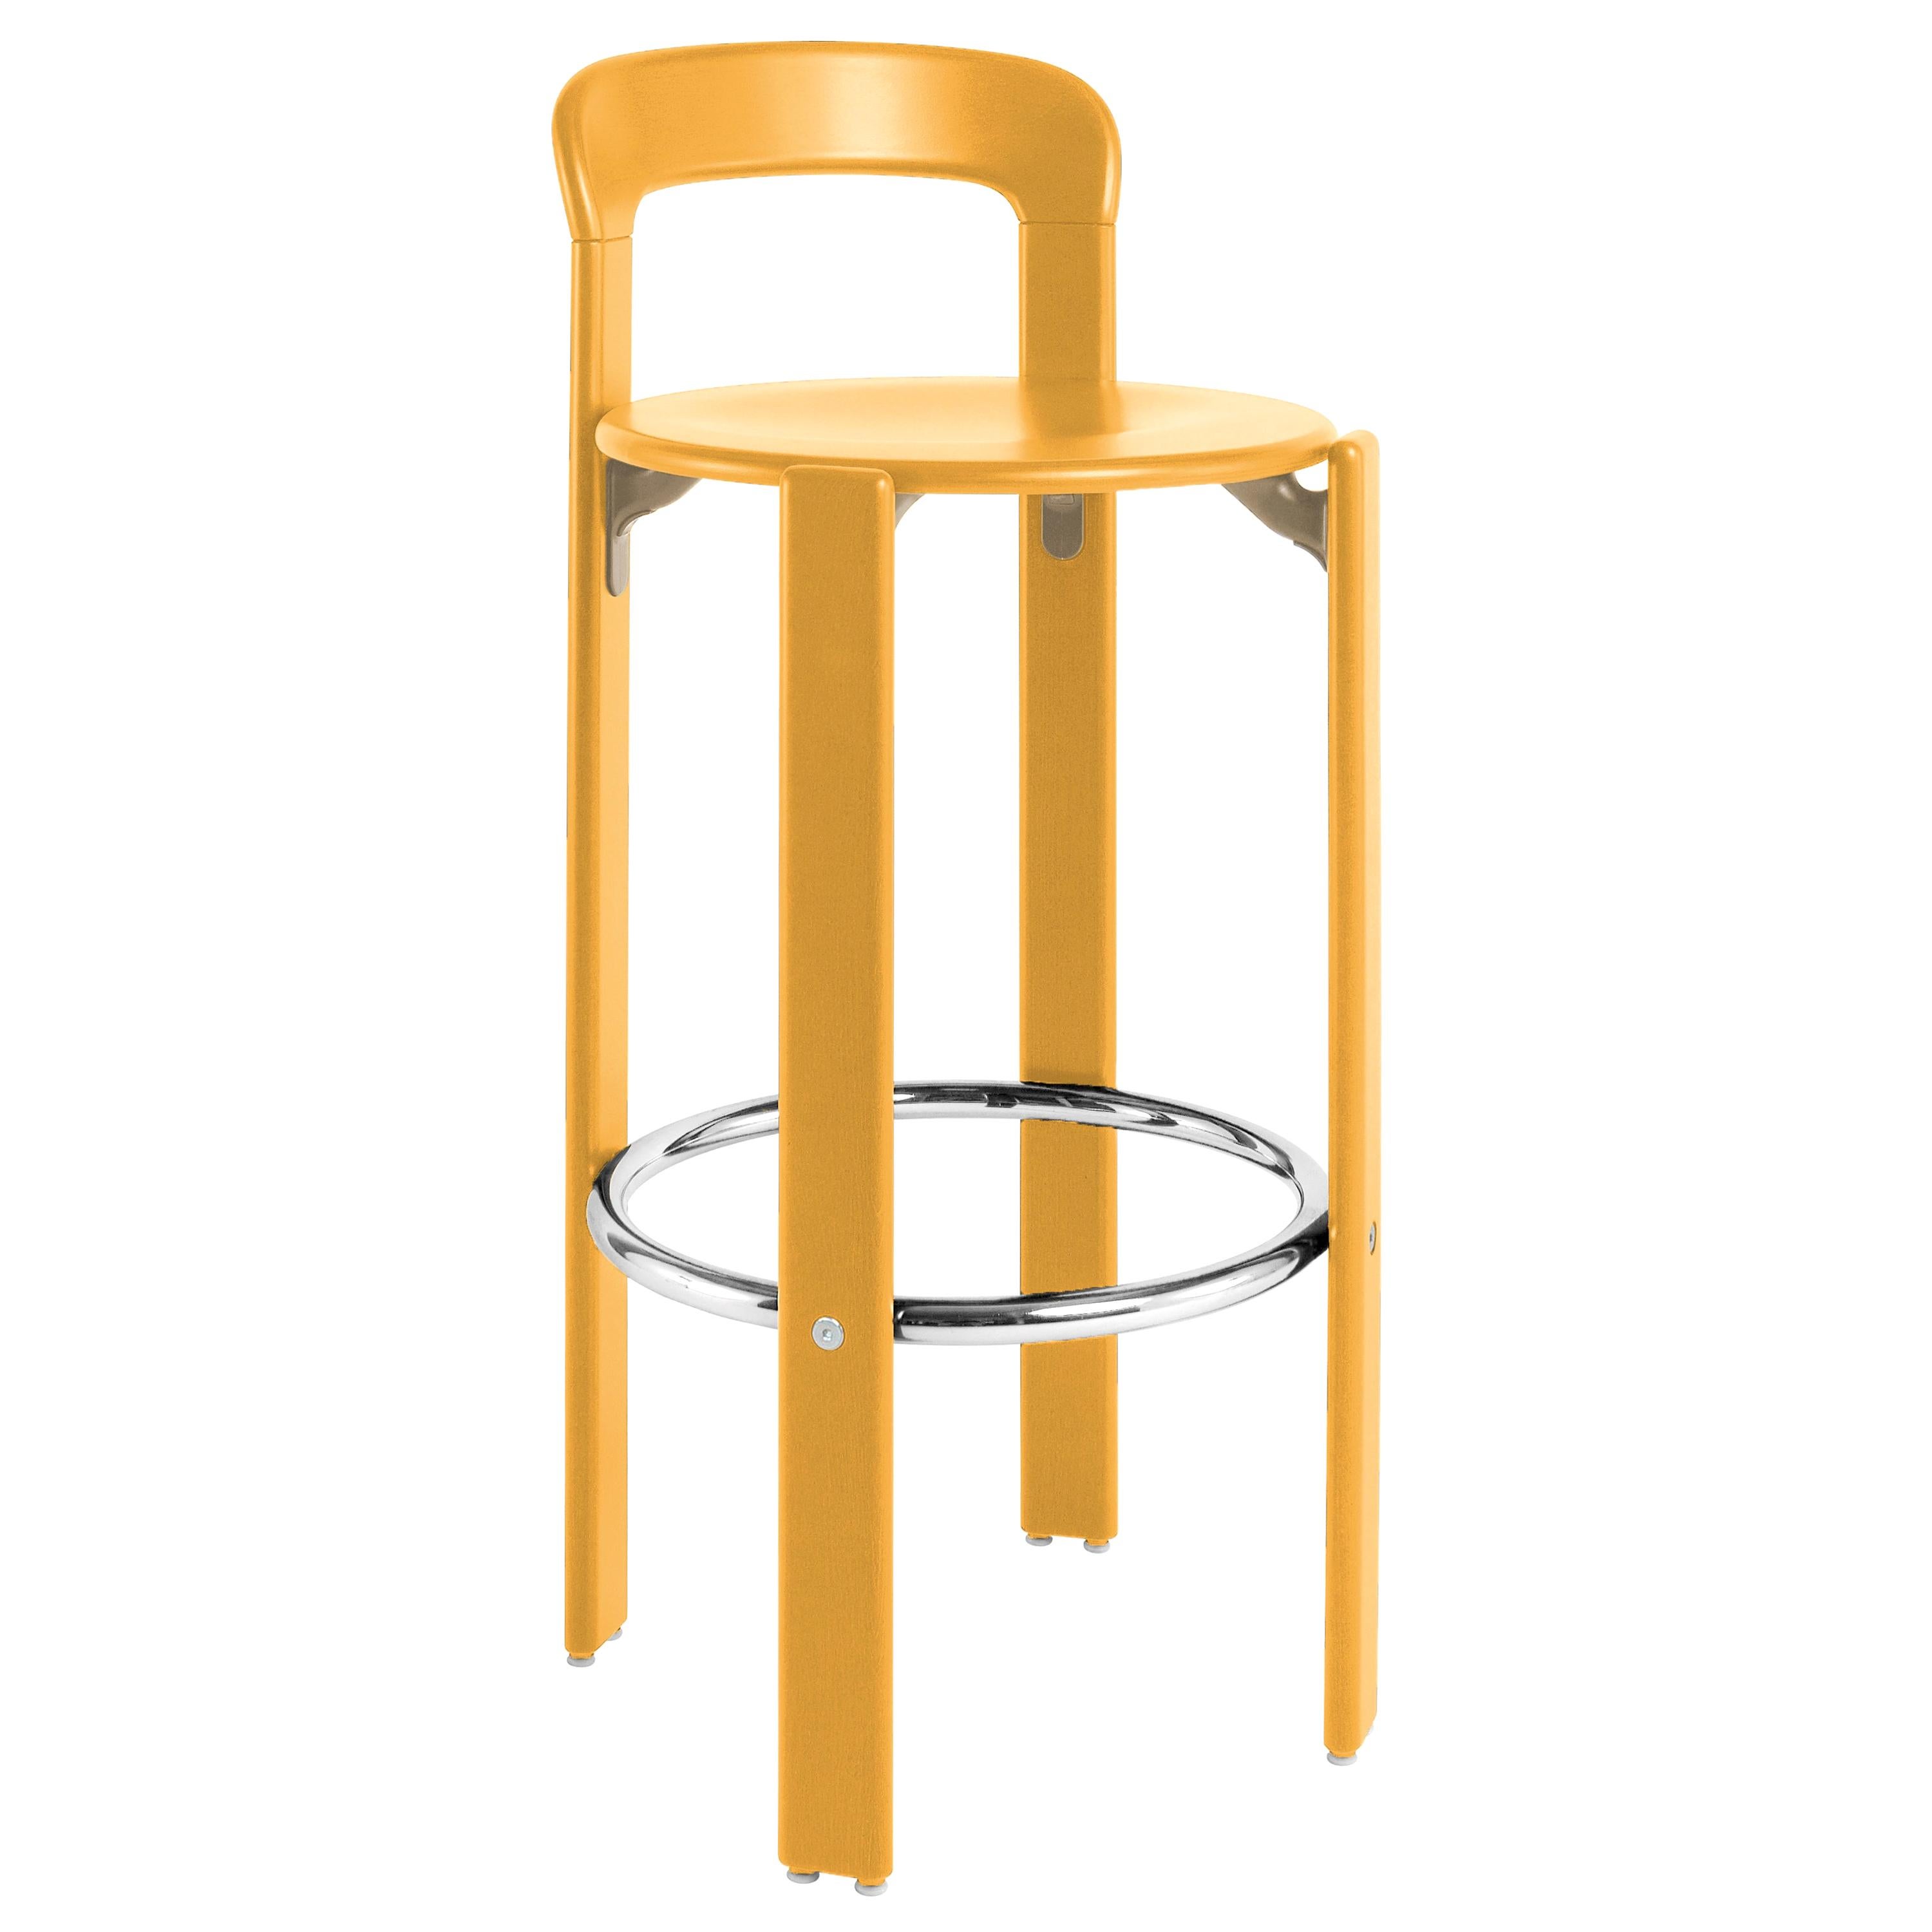 Rey Barstool with Back, Mid-Century Modern, Color Vintage Beech, Bruno Rey, 1971